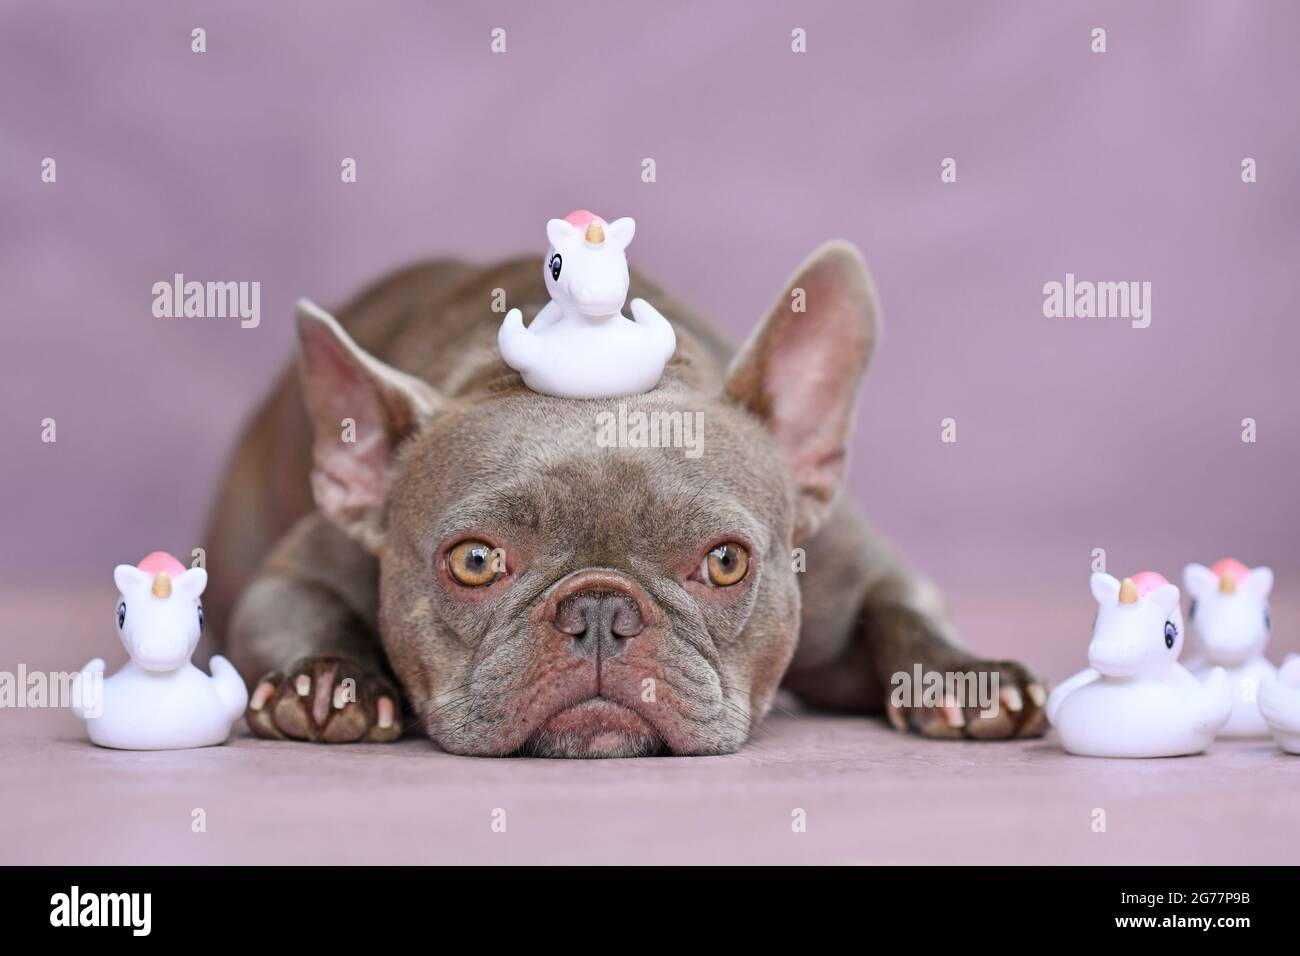 Funny French Bulldog dog with unicorn rubber duck on head Stock Photo